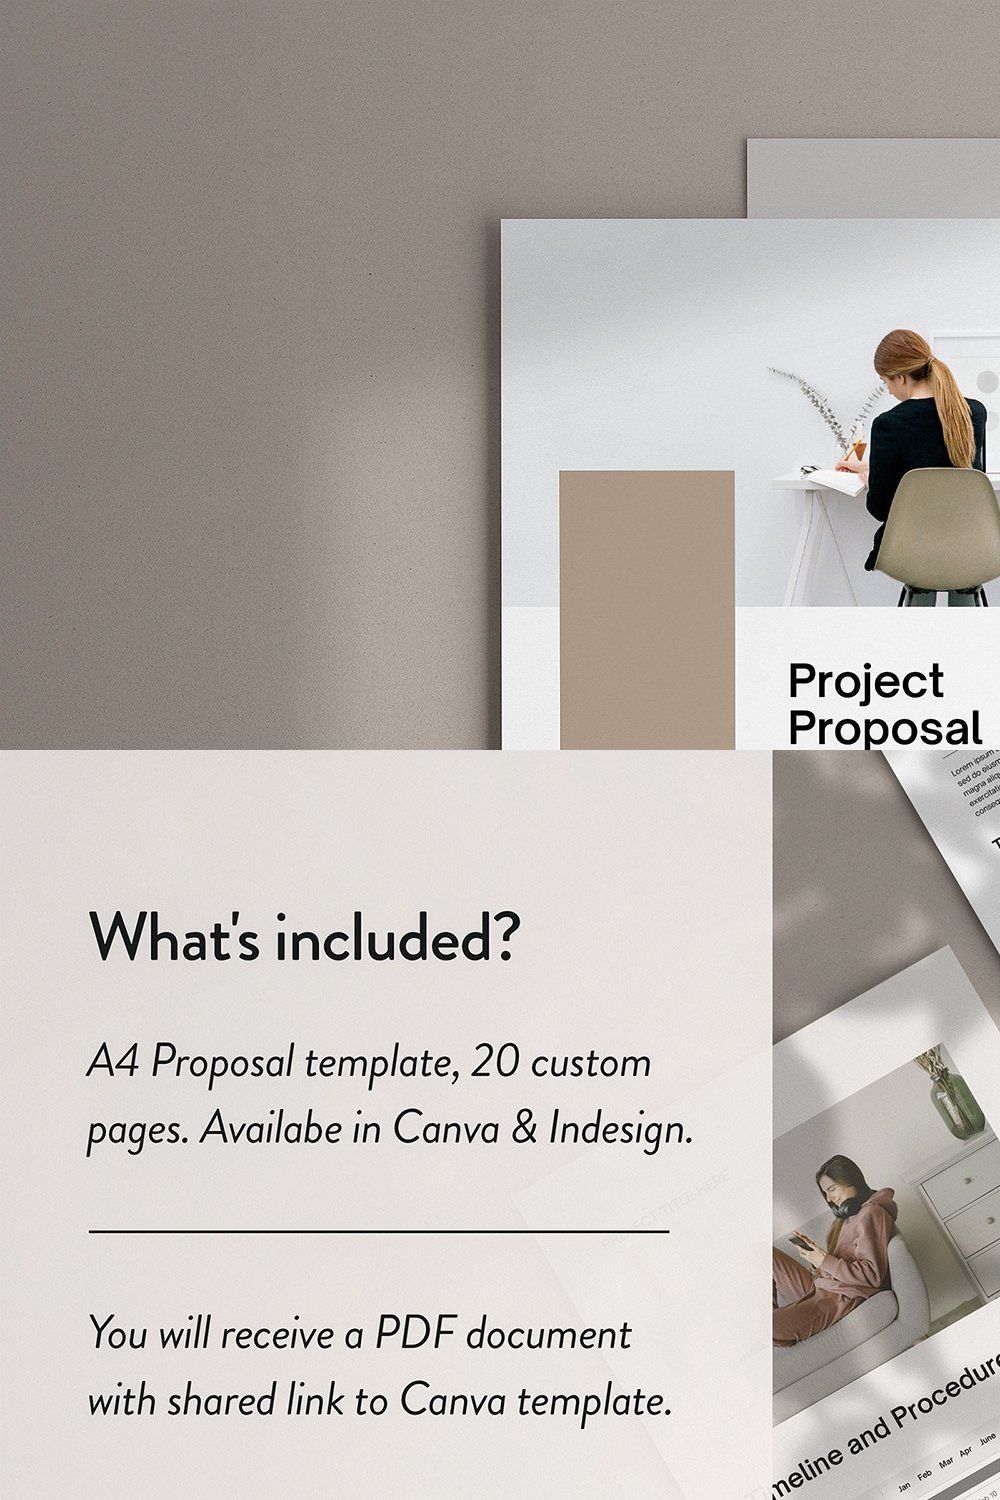 Project Proposal - Canva pinterest preview image.